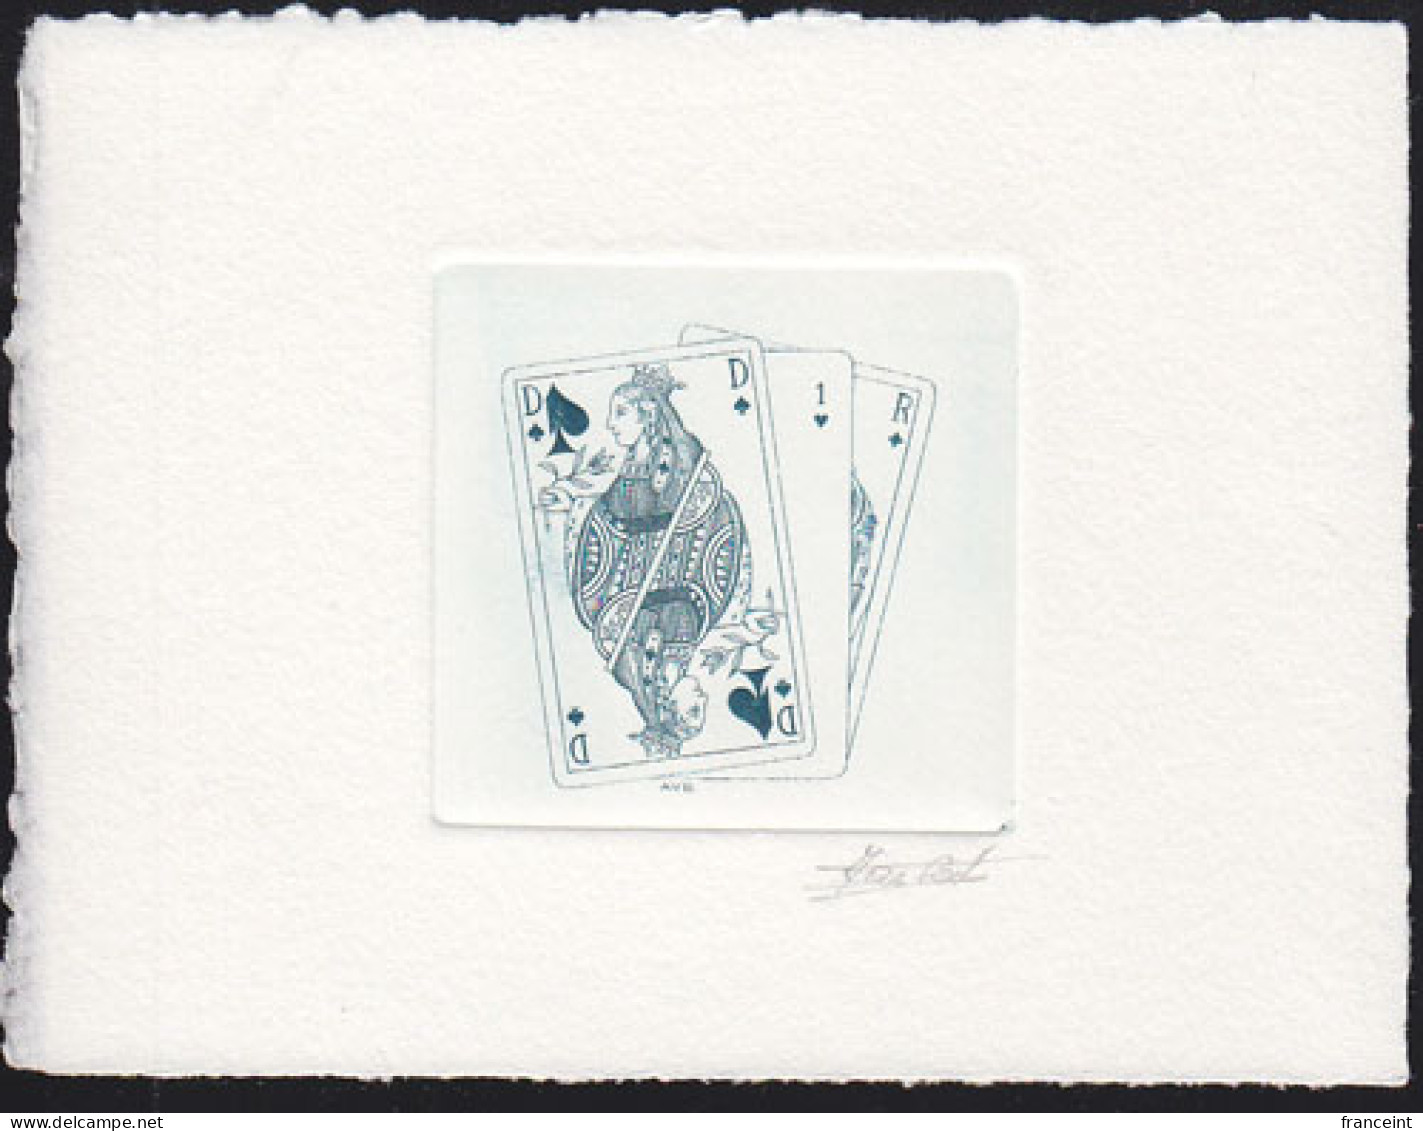 BELGIUM(1995) Playing Cards. Die Proof In Blue Signed By The Engraver, Representing The FDC Cachet. Scott No 1579 - Proofs & Reprints